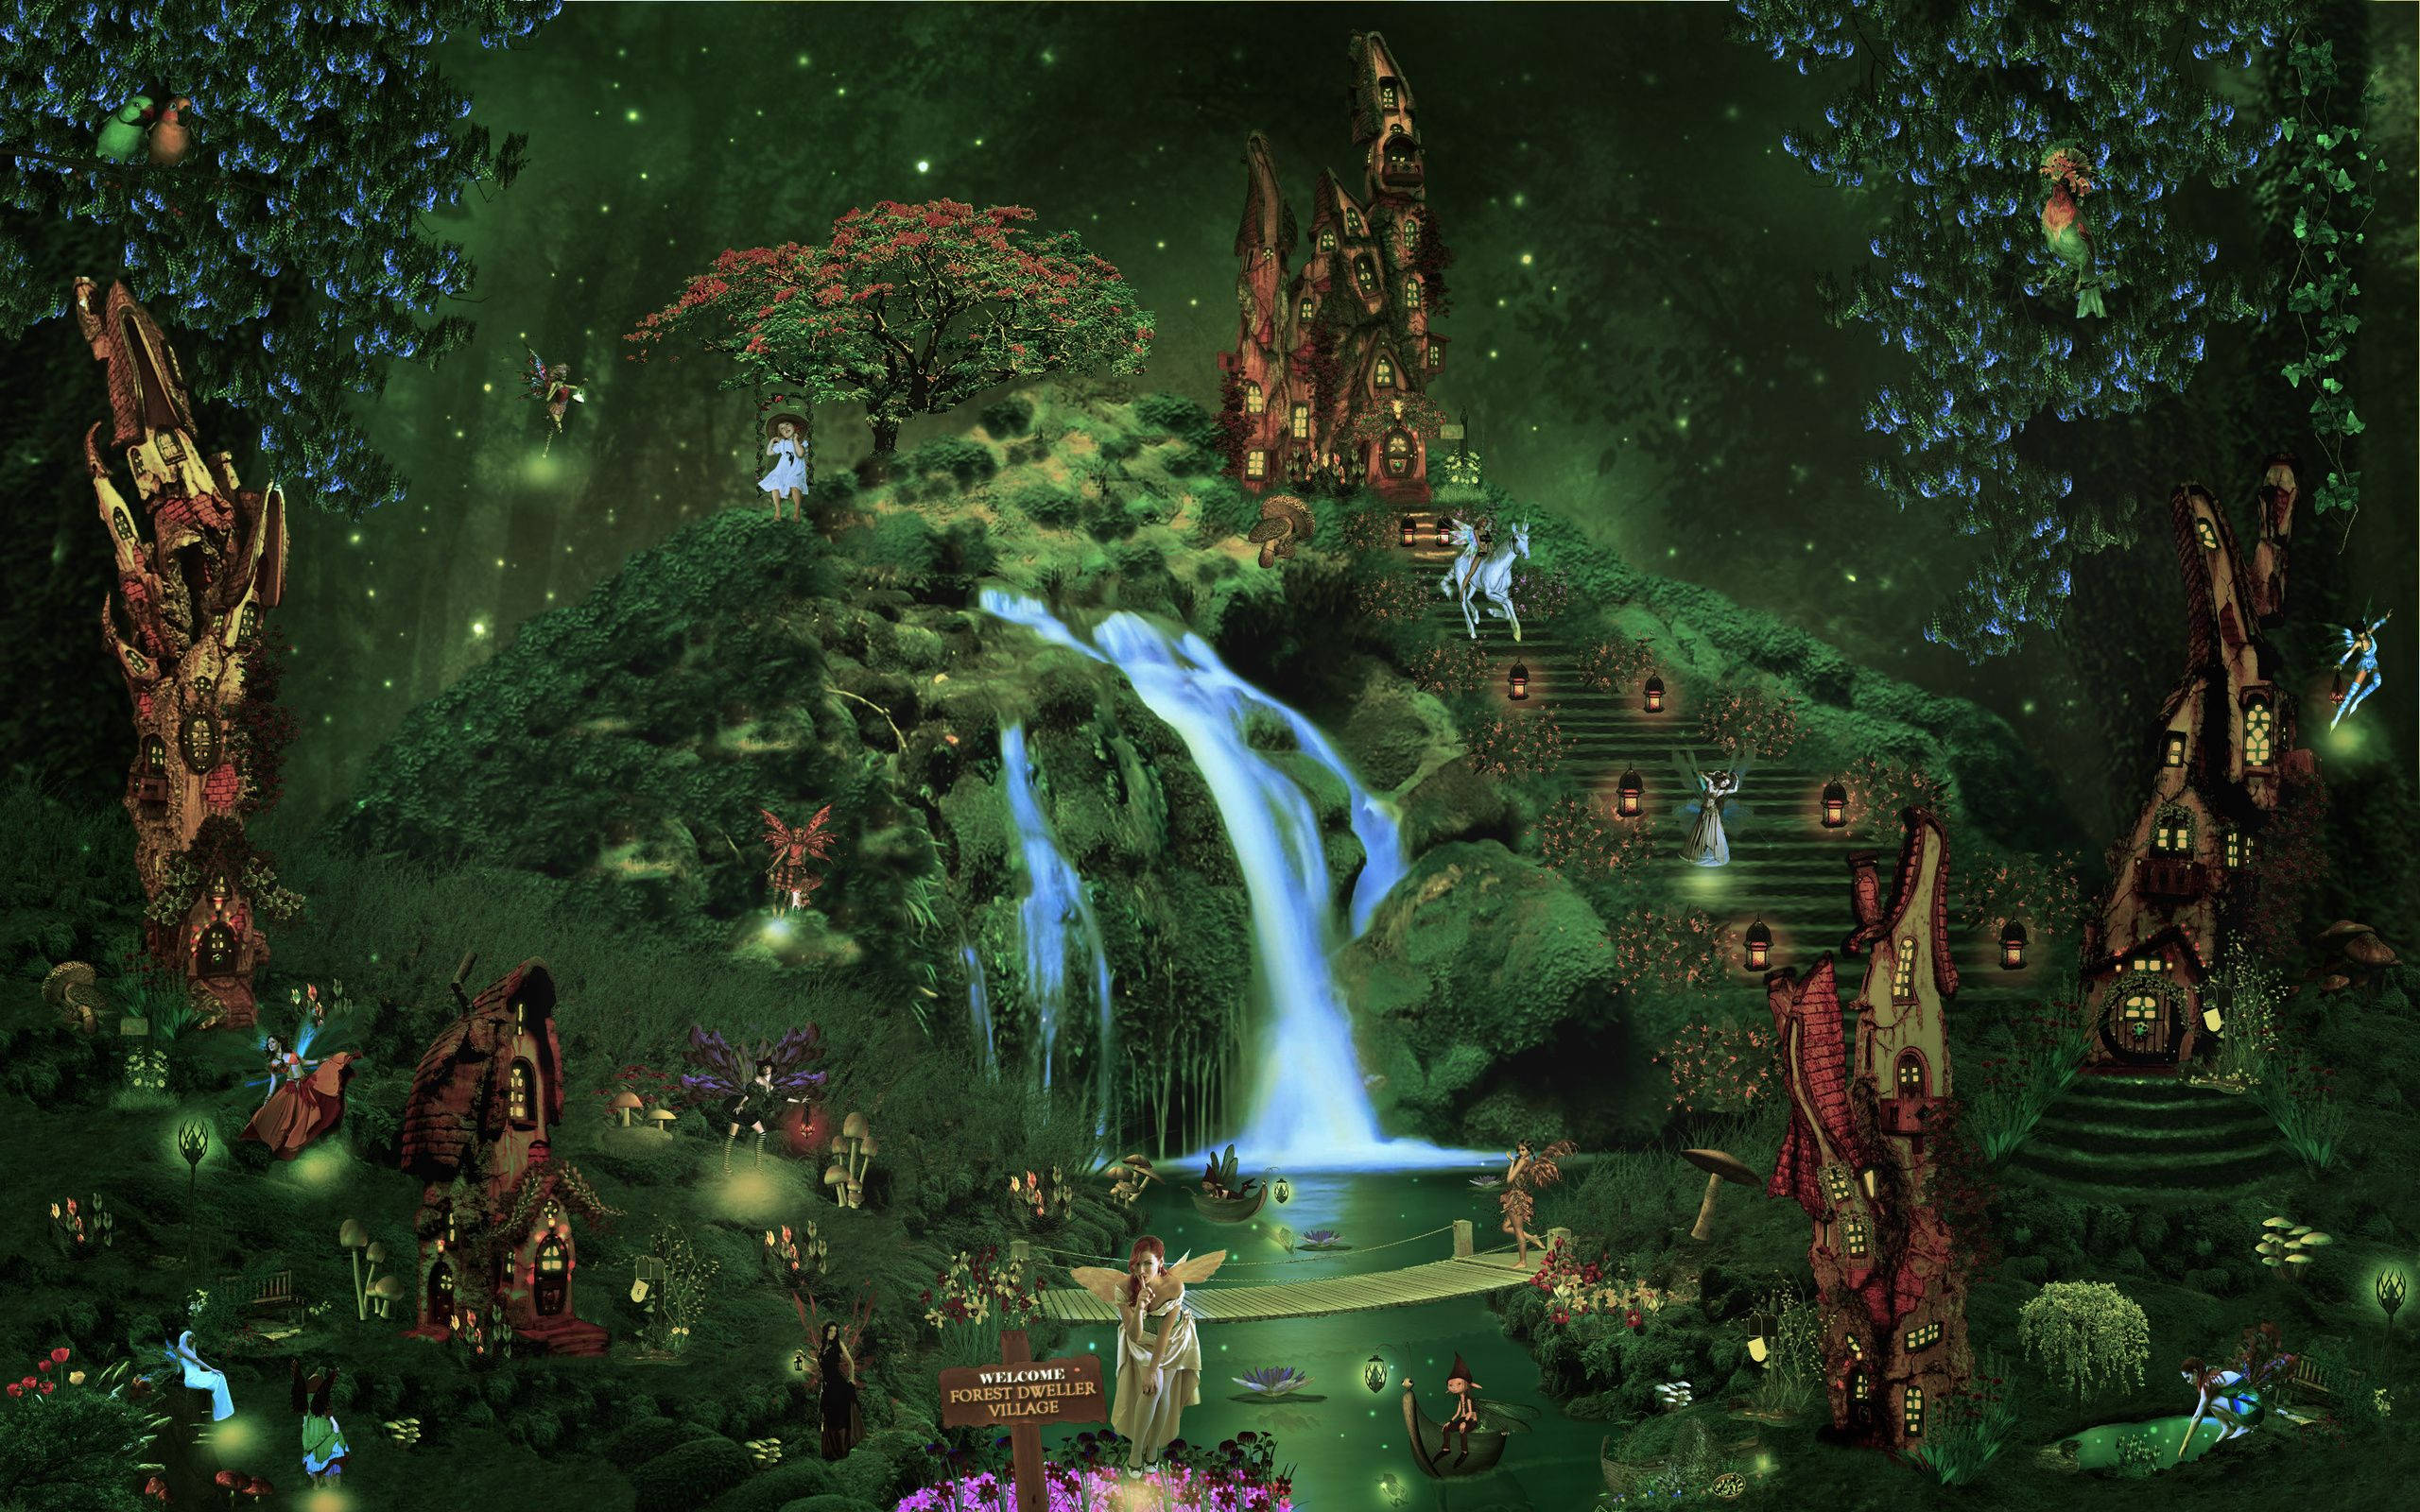 Enchanted Forest Fairy Village Picture